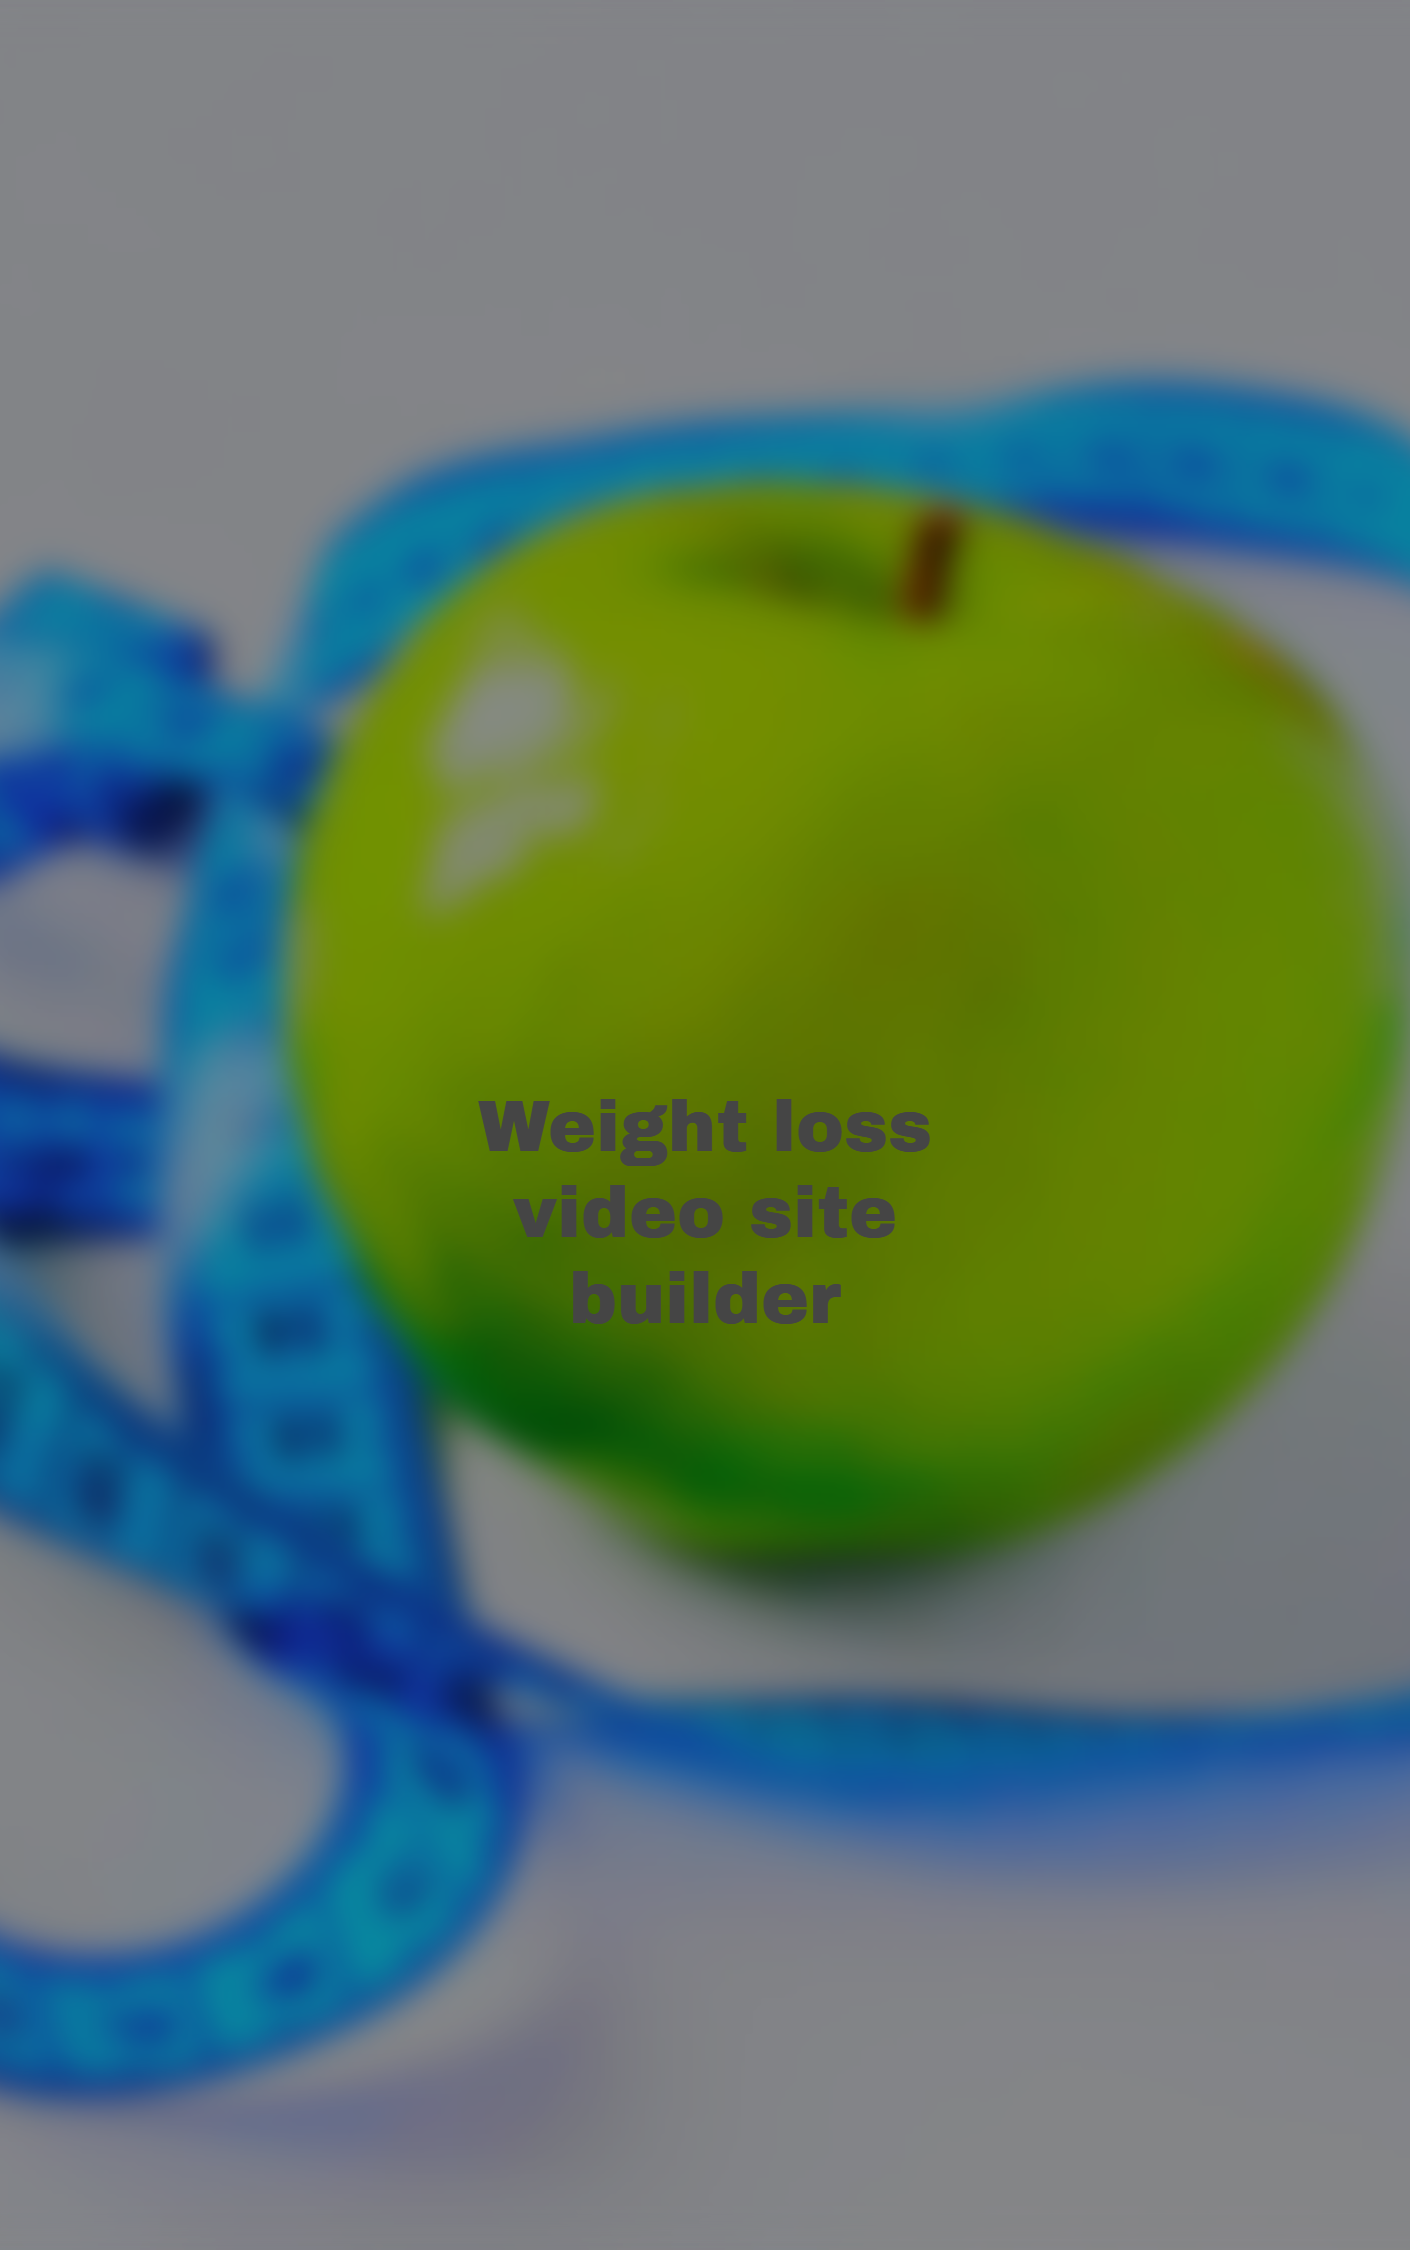 Weight loss video site builder for loss weight